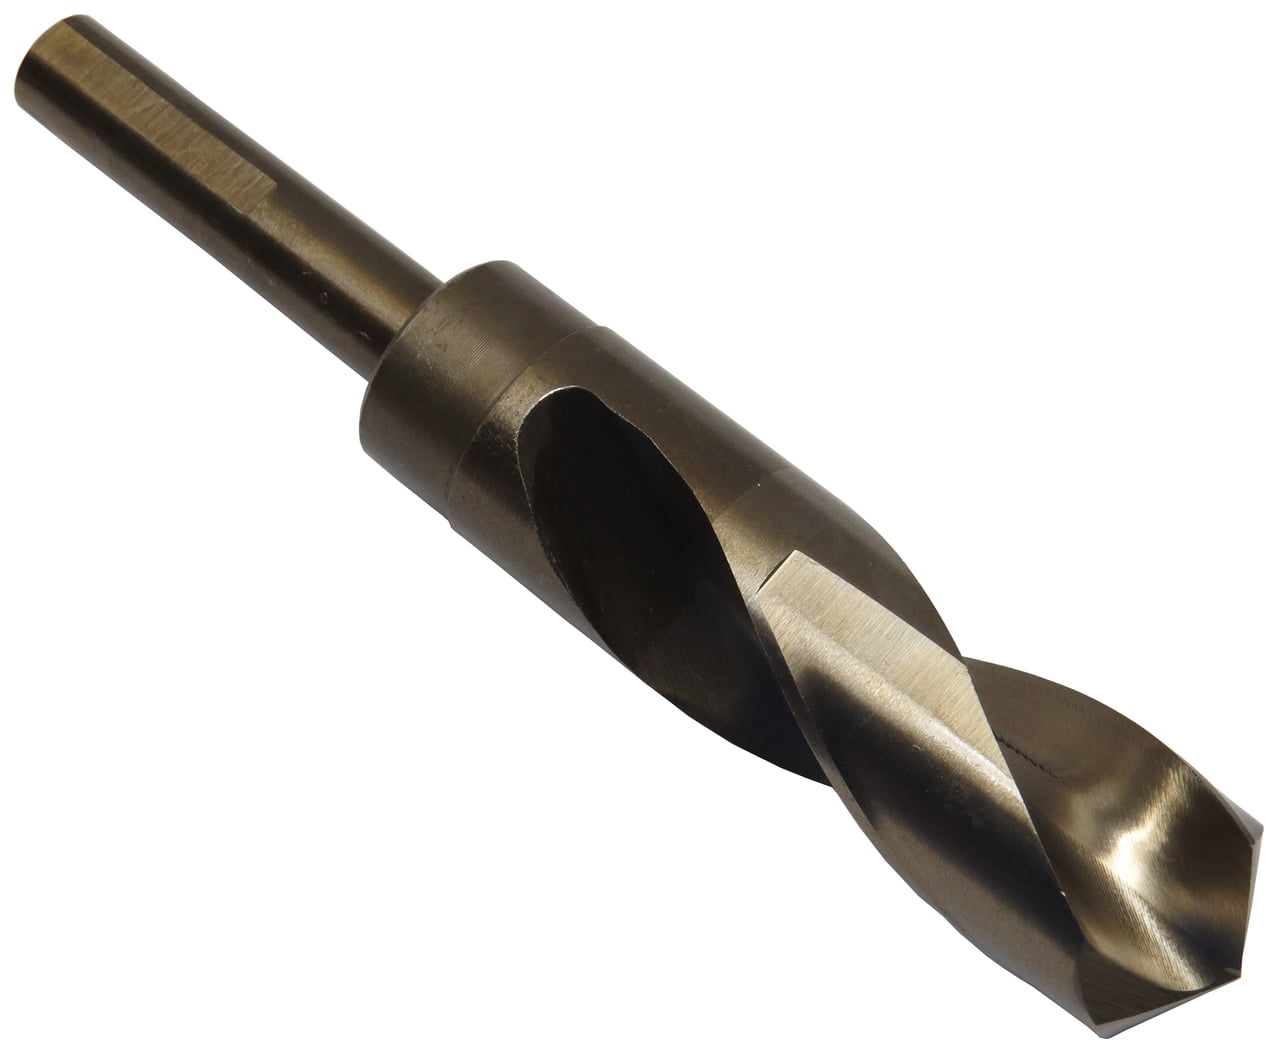 SINGLE & DOUBLE ENDED 2.4-6.5mm  3/32"-1/4" 10 x HSS QUALITY STUB DRILL BITS 